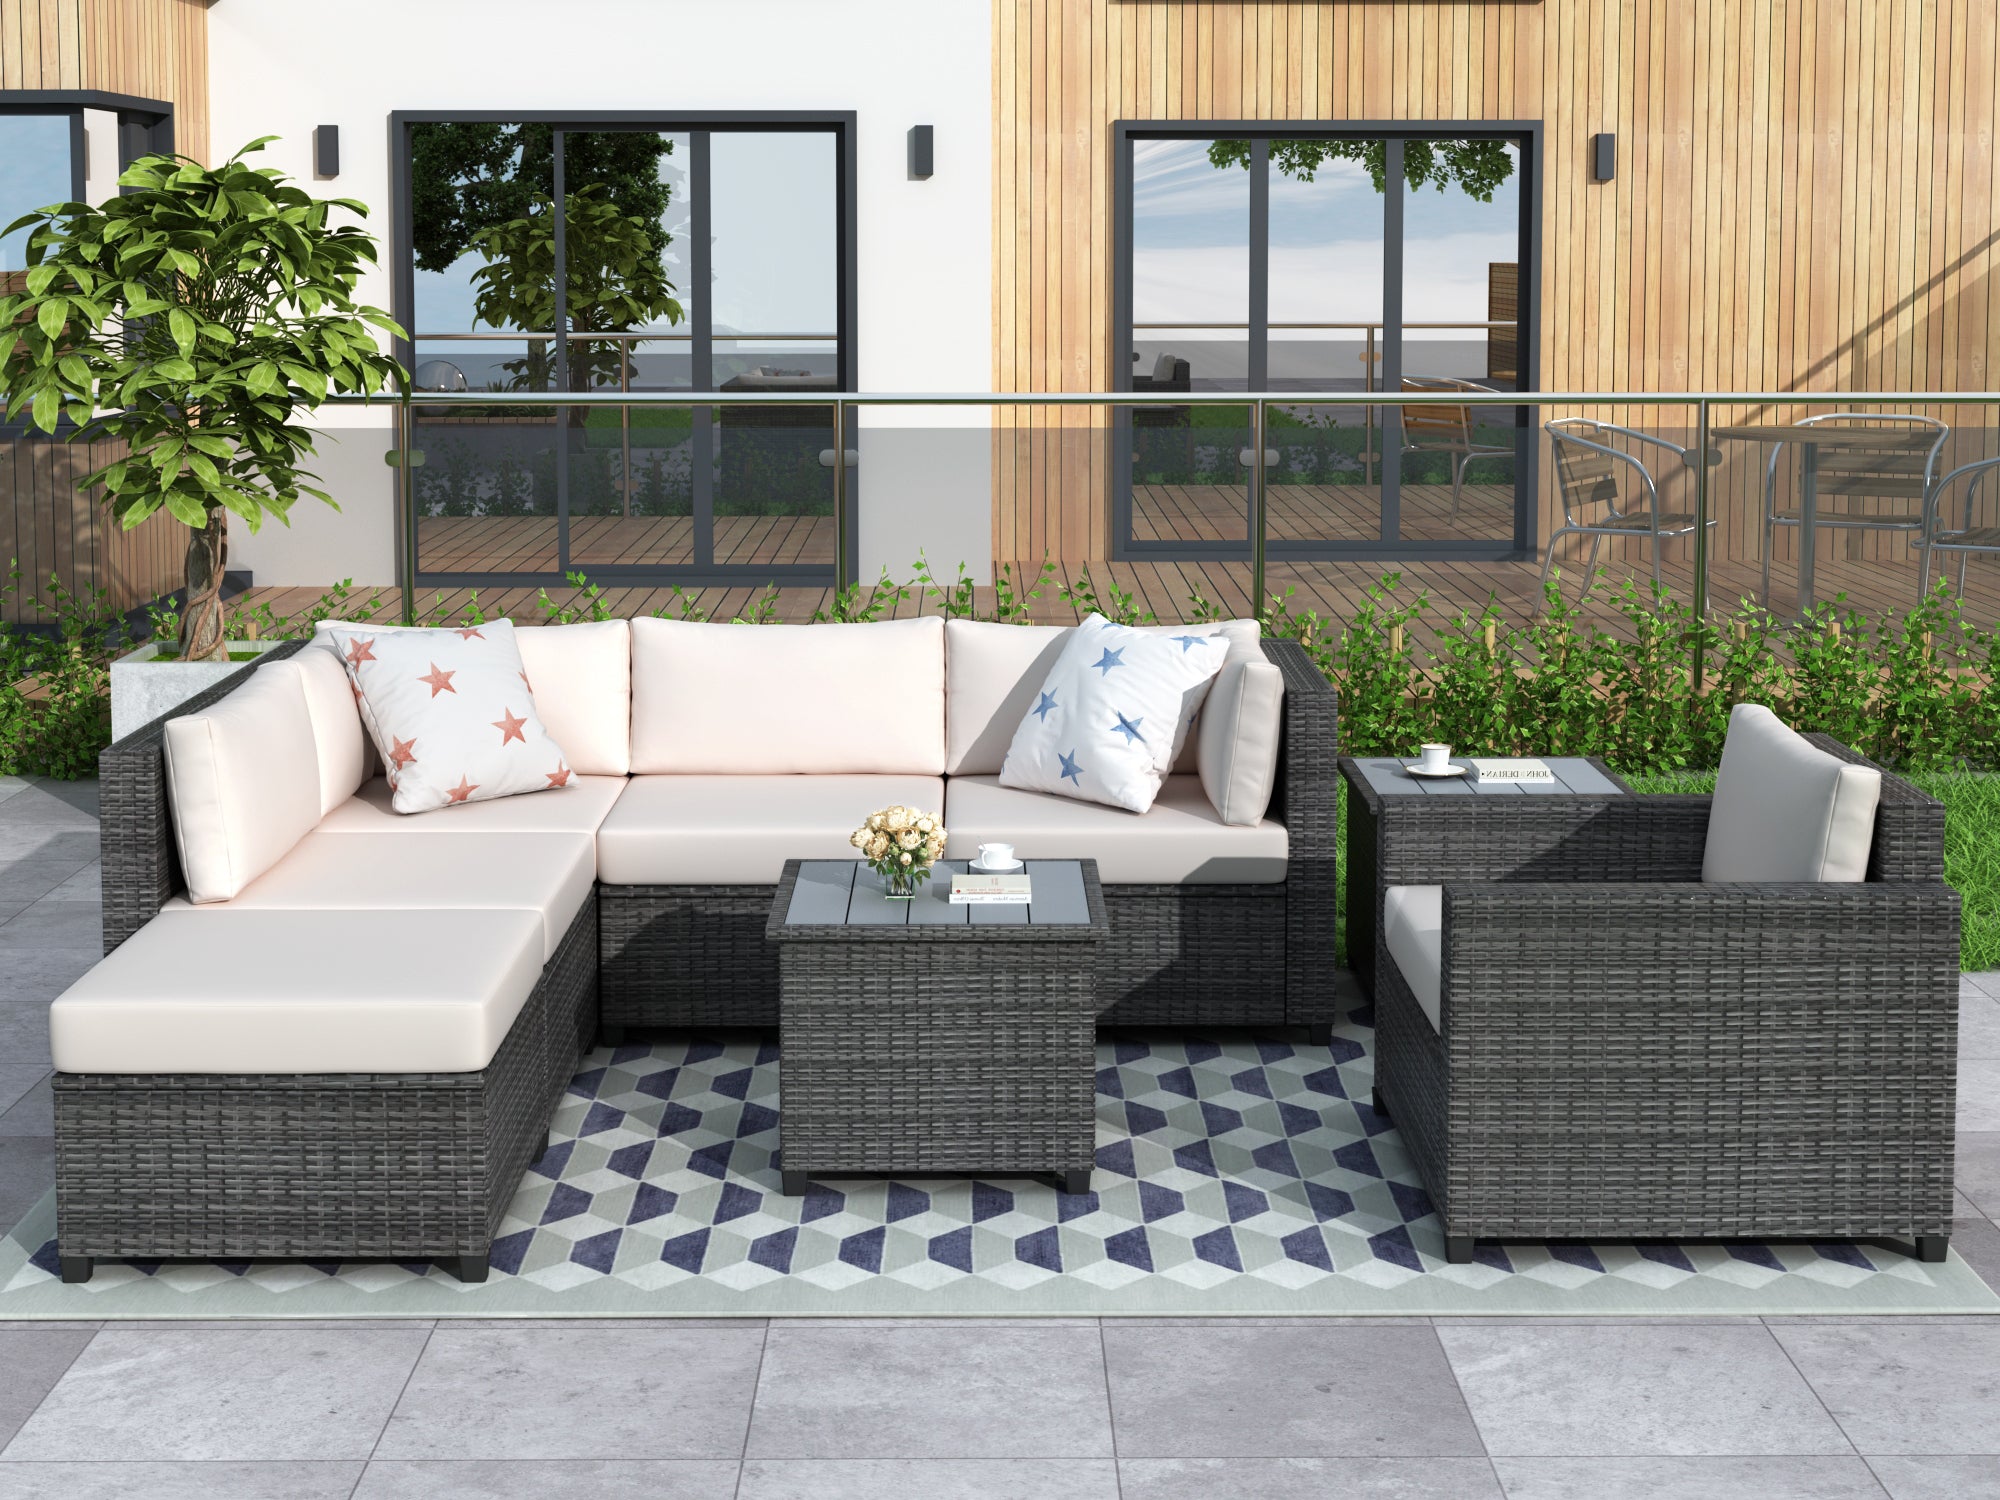 8 Piece Rattan Sectional Seating Group with Cushions Furniture Sets